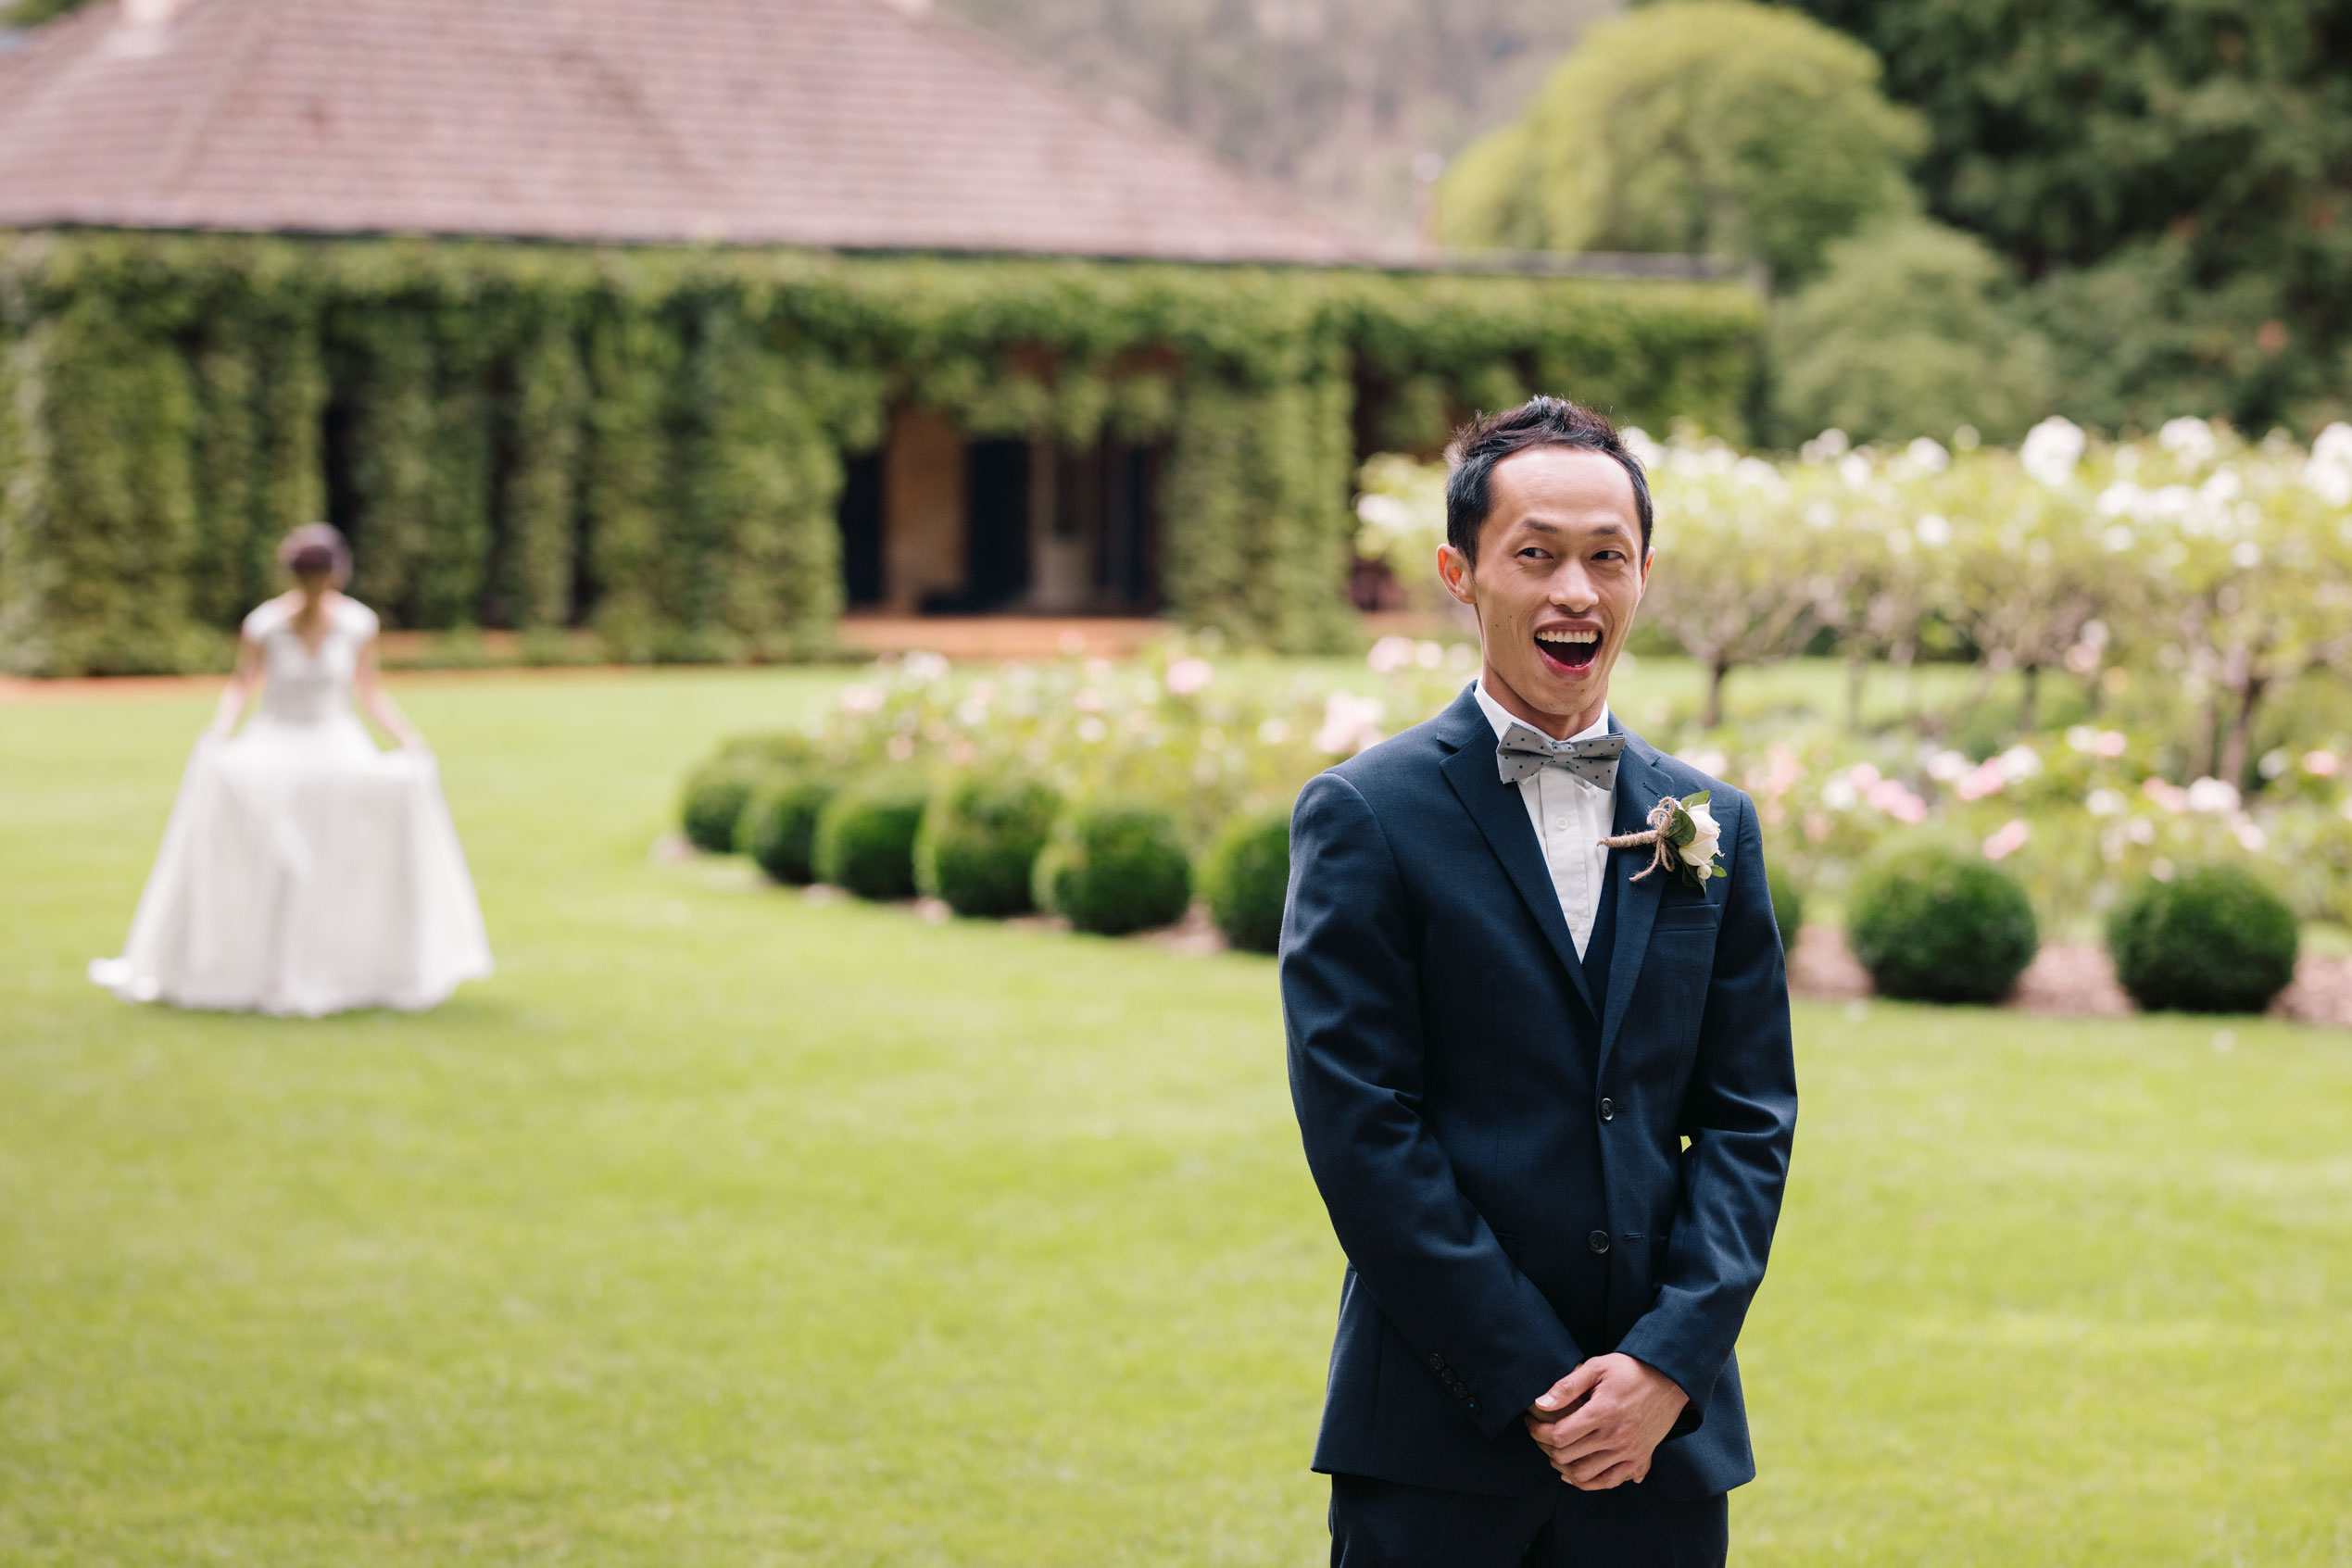 Groom excited to see bride for the first time - first look